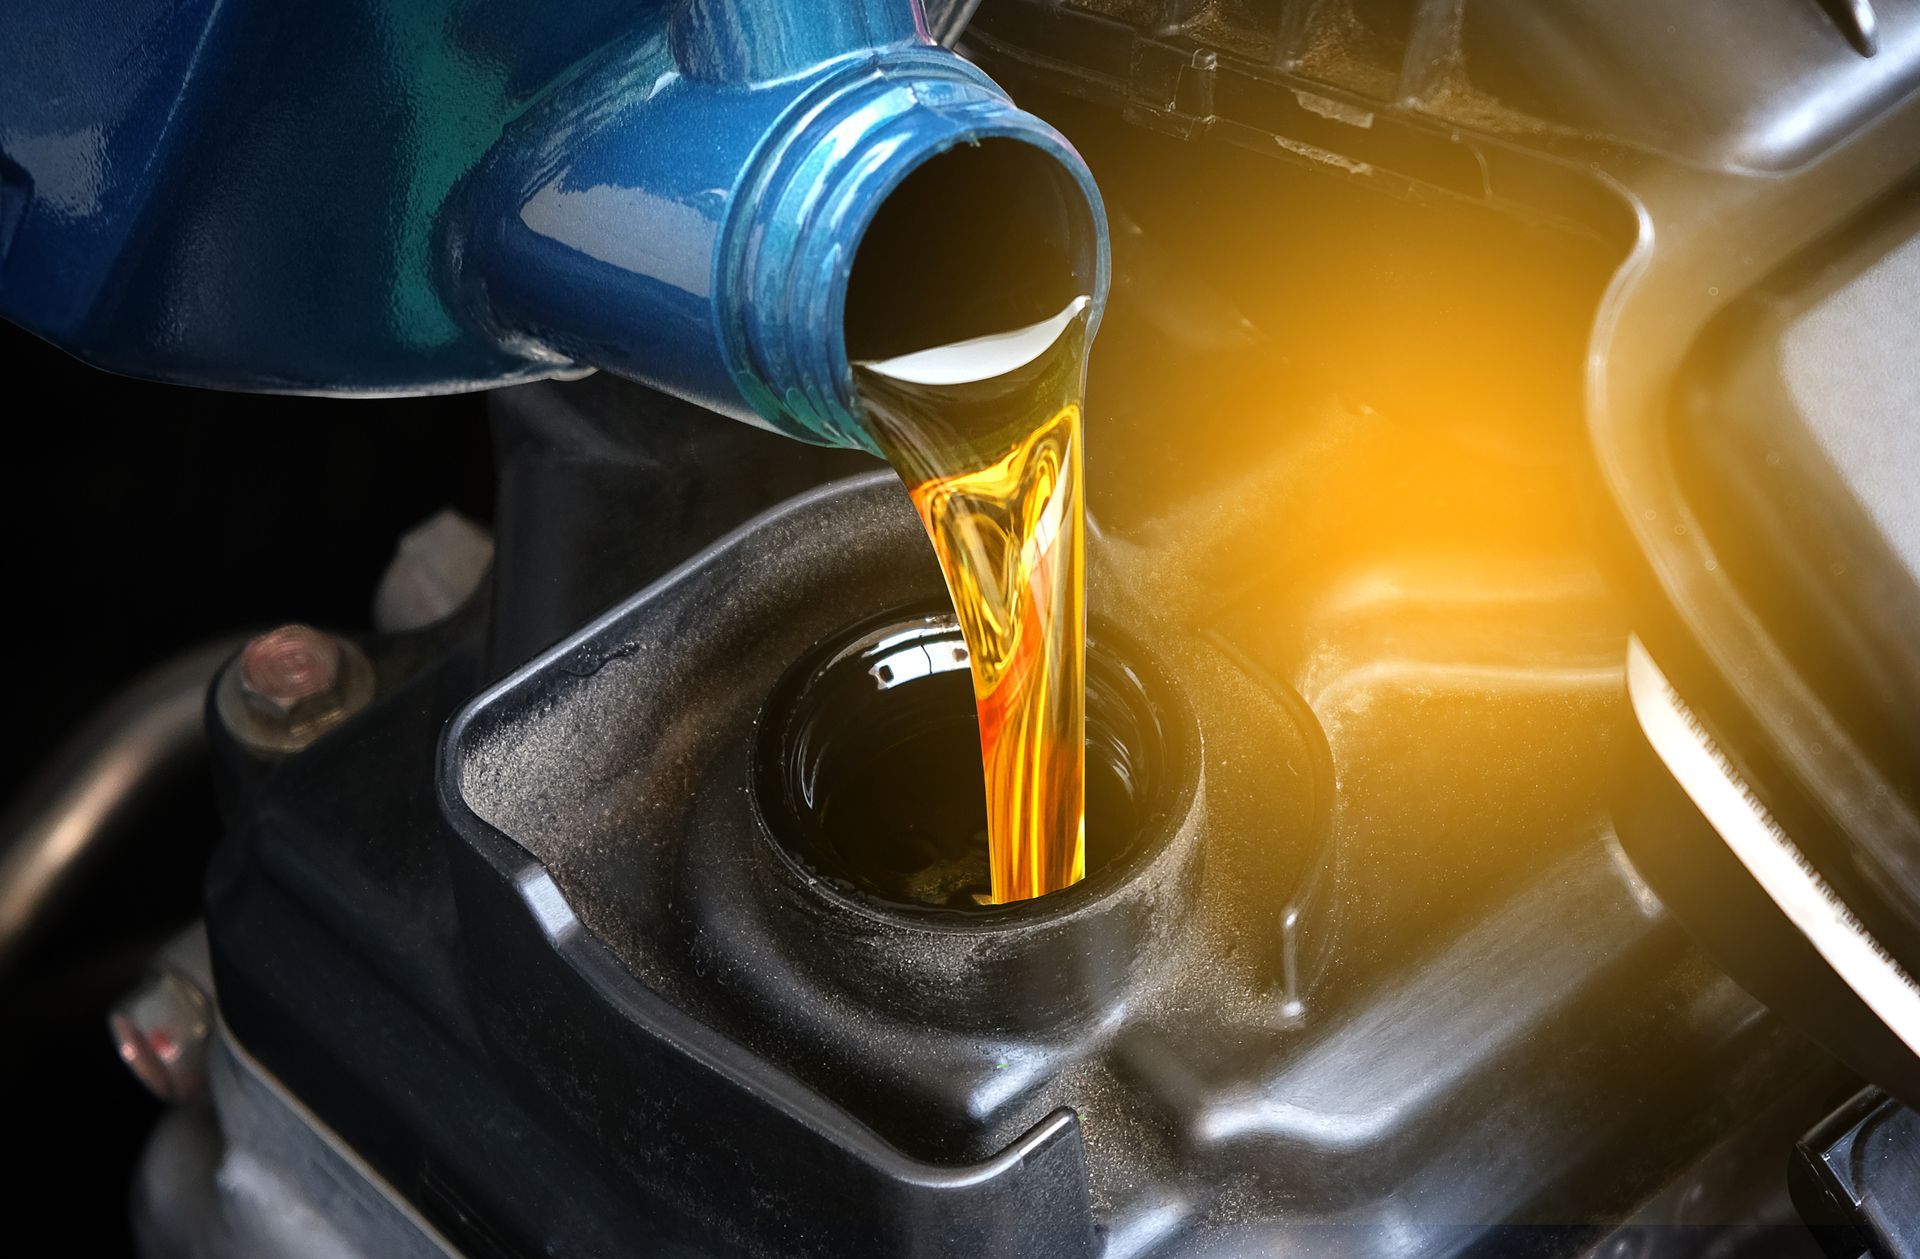  new car oil is being poured | Modern Automotive